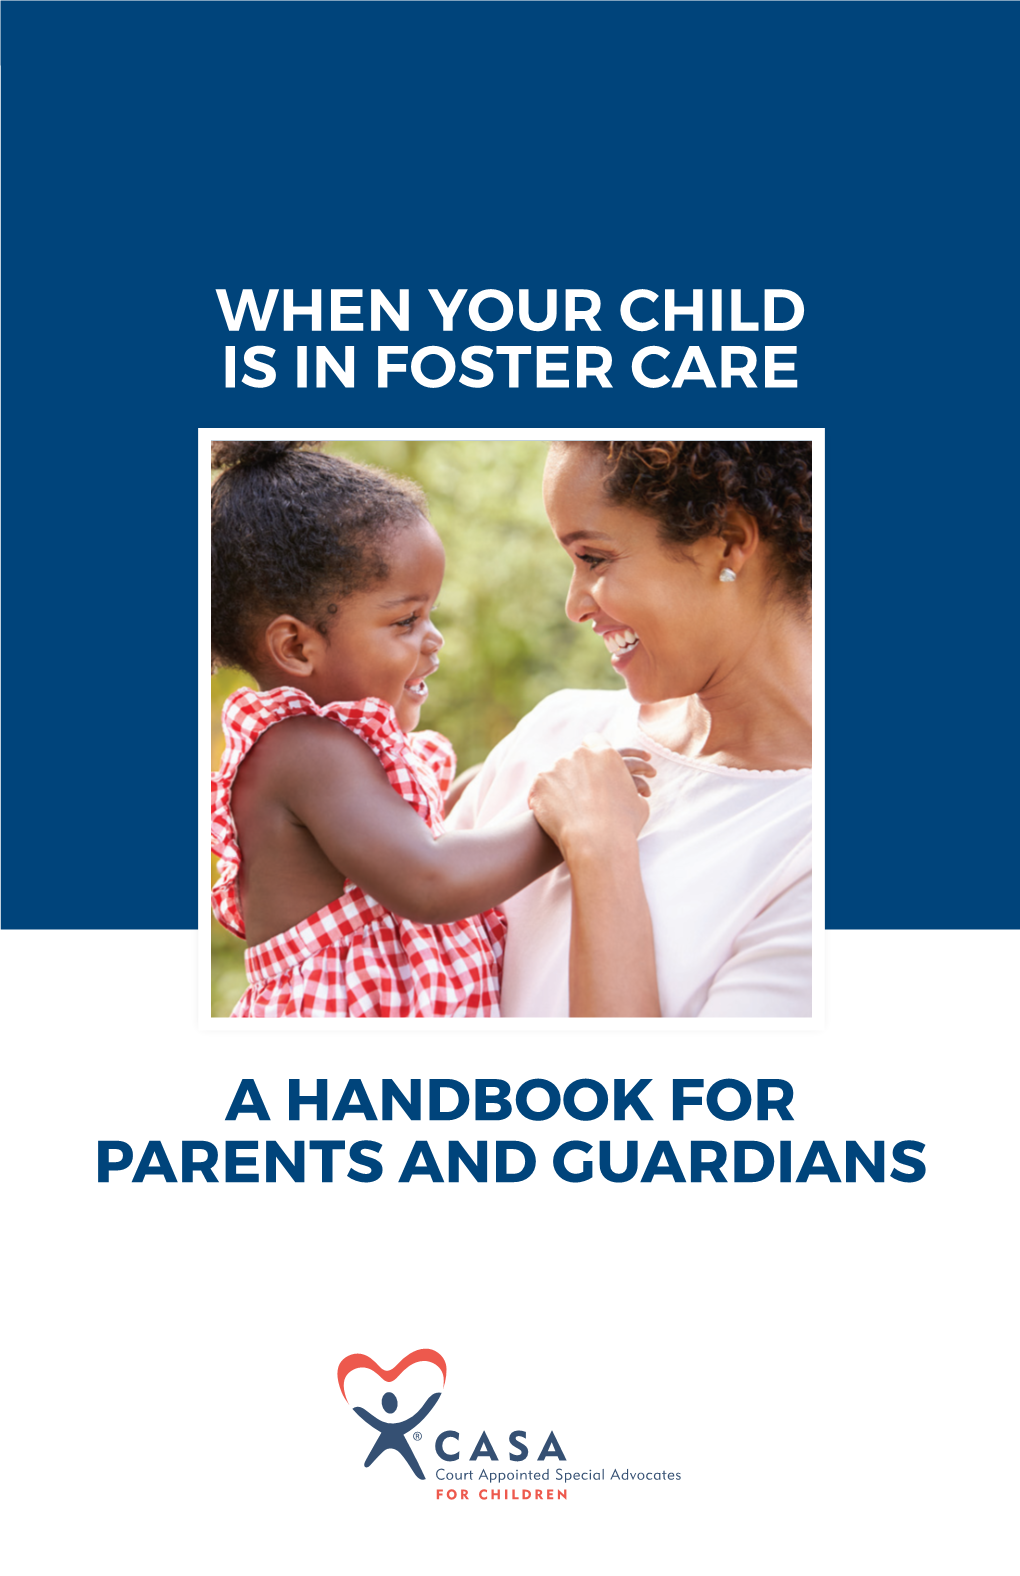 A Handbook for Parents and Guardians When Your Child Is in Foster Care